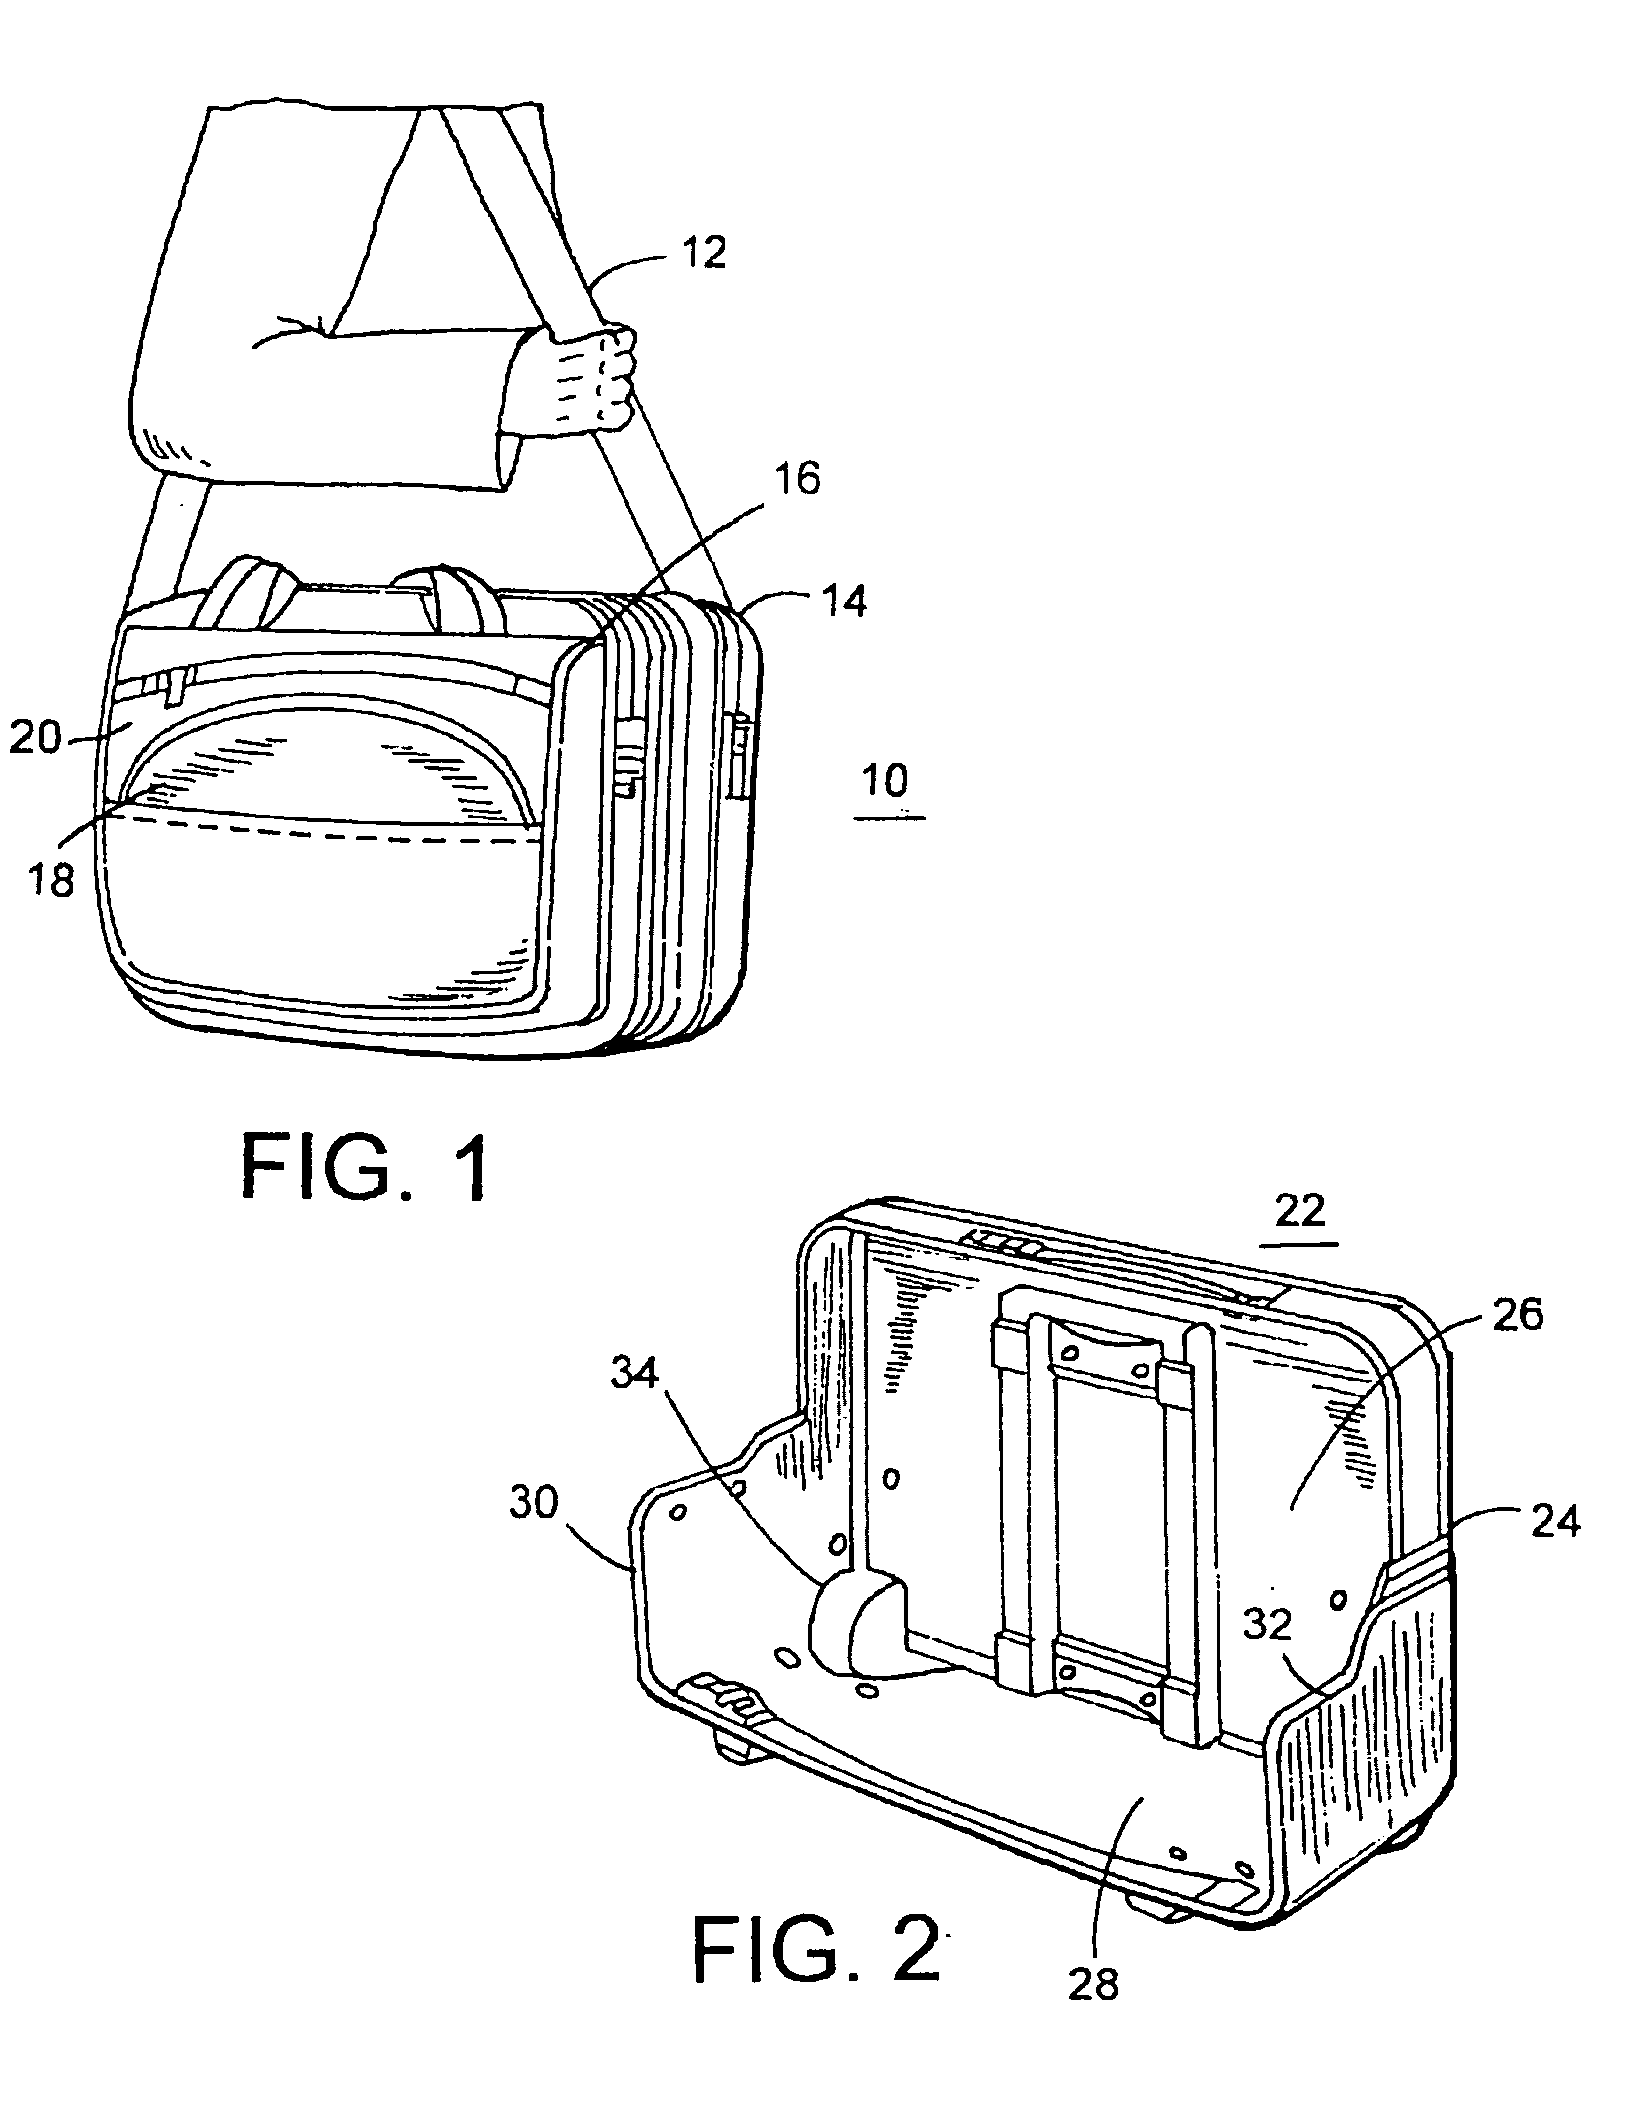 Business case with removable handle and wheel assembly